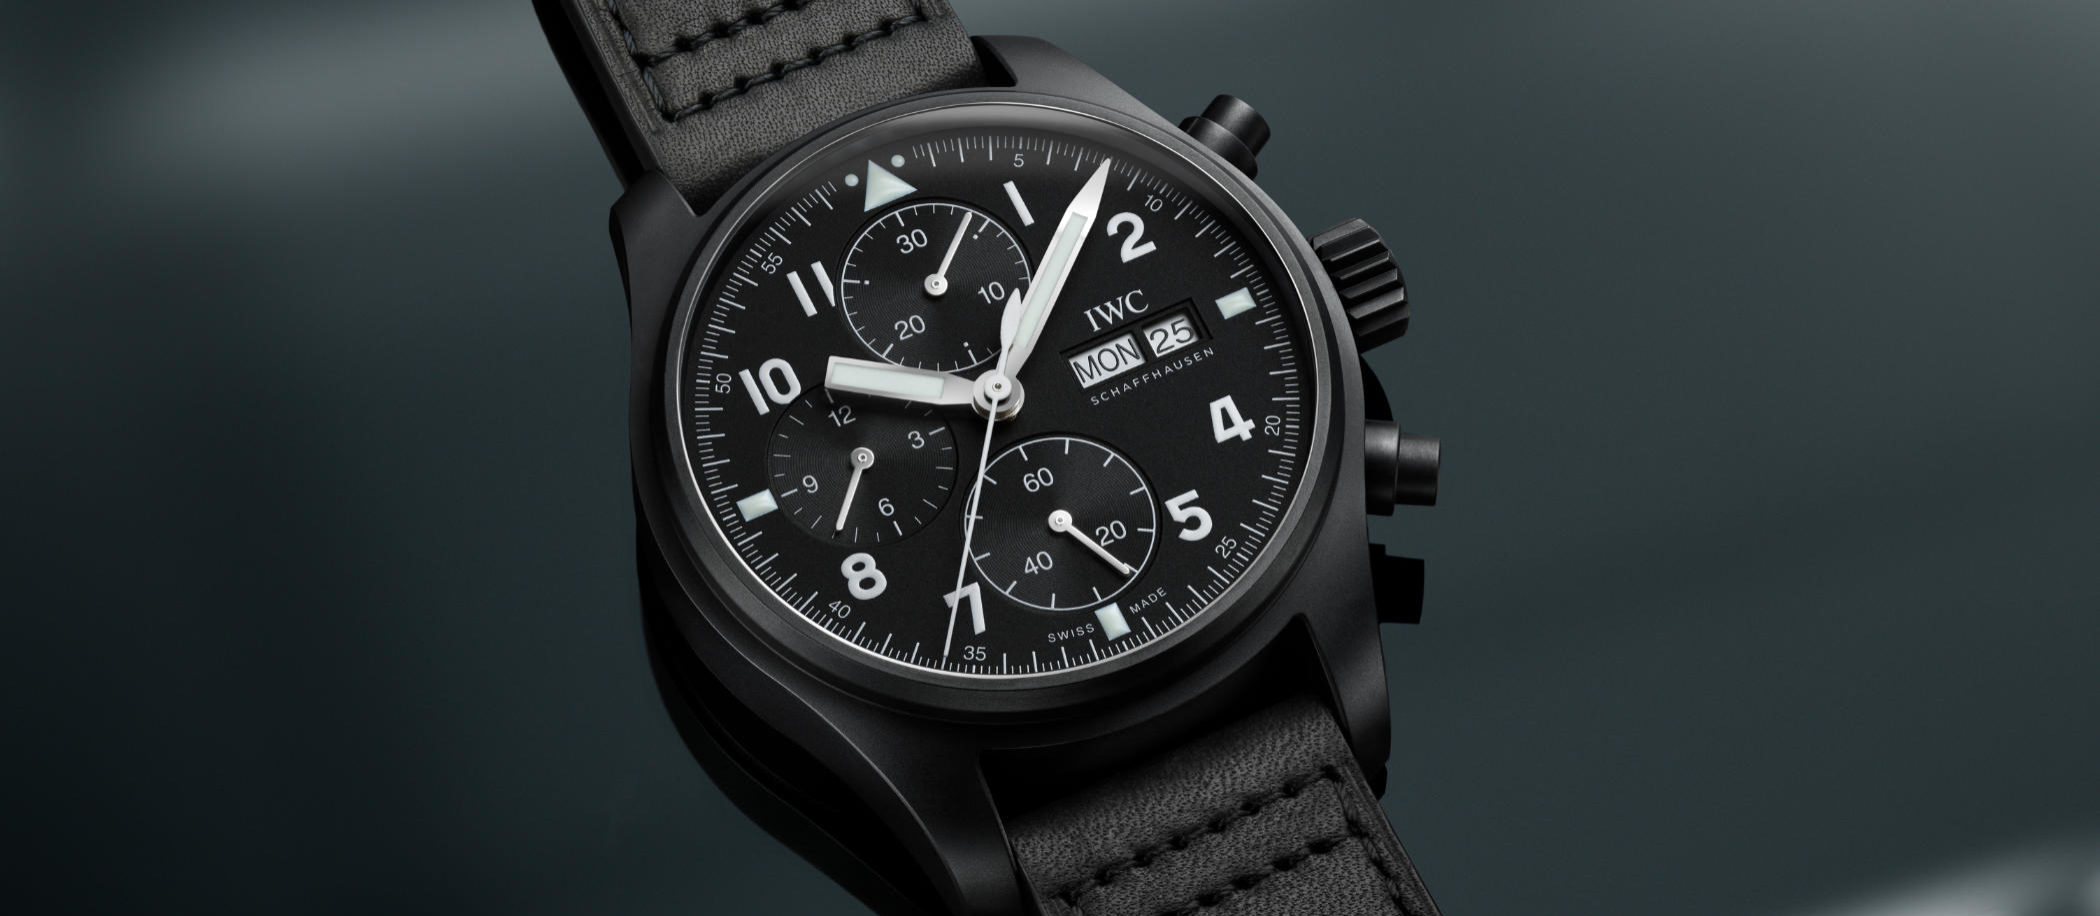 IWC Pilot’s Watch Chronograph Edition “Tribute to 3705”